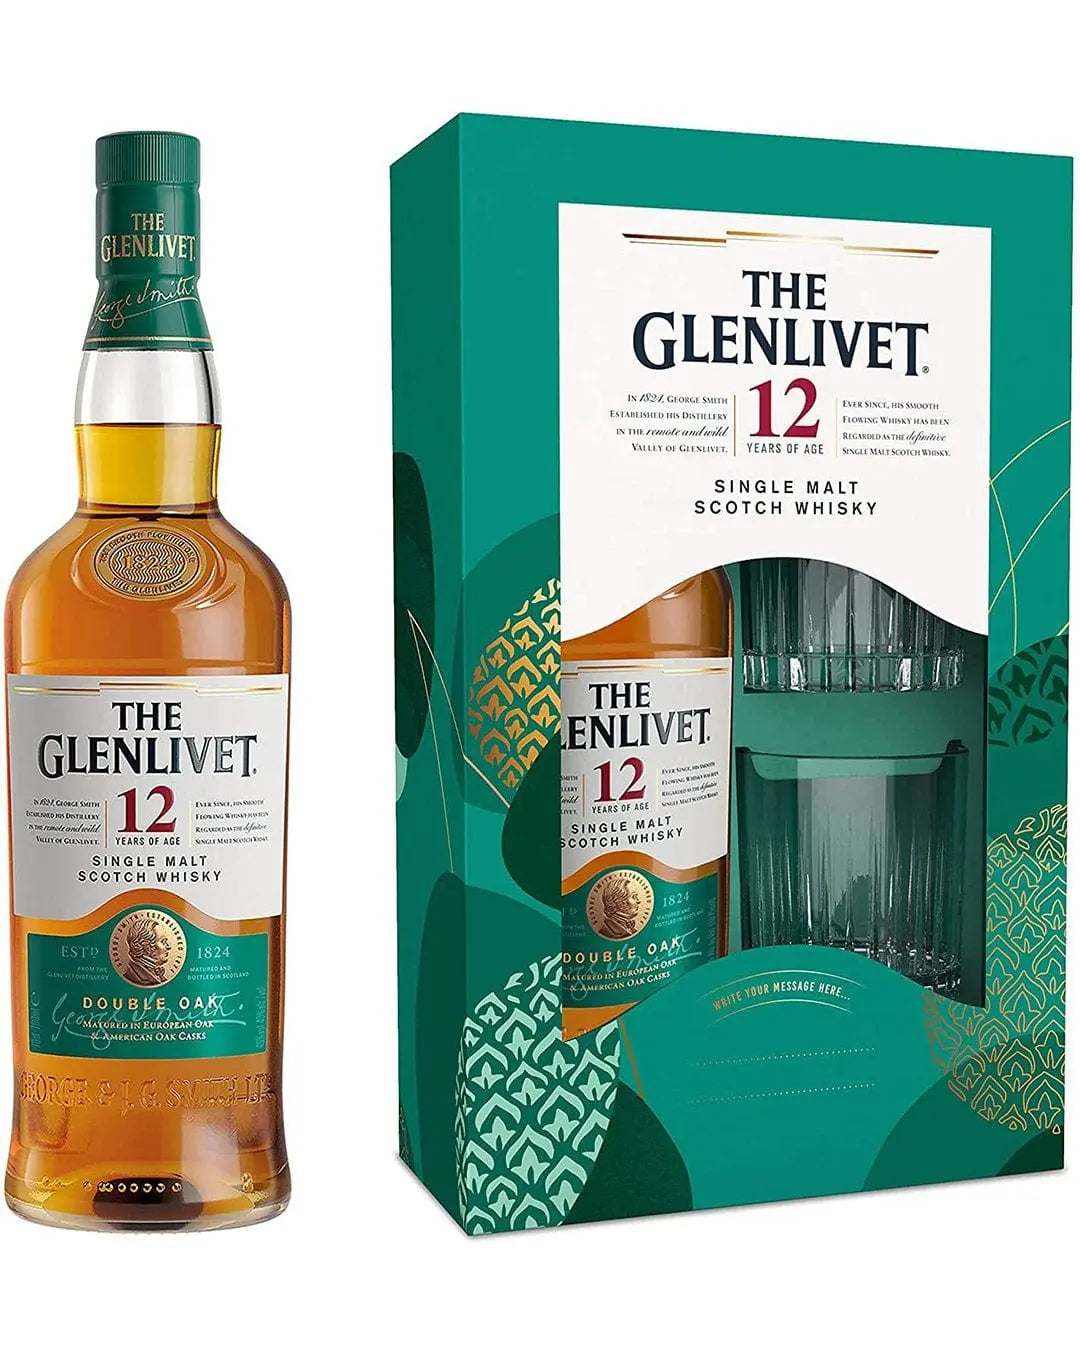 The Glenlivet 12 Year Old Single Malt Scotch Whisky Gift Pack with Two Glasses, 70 cl Whisky